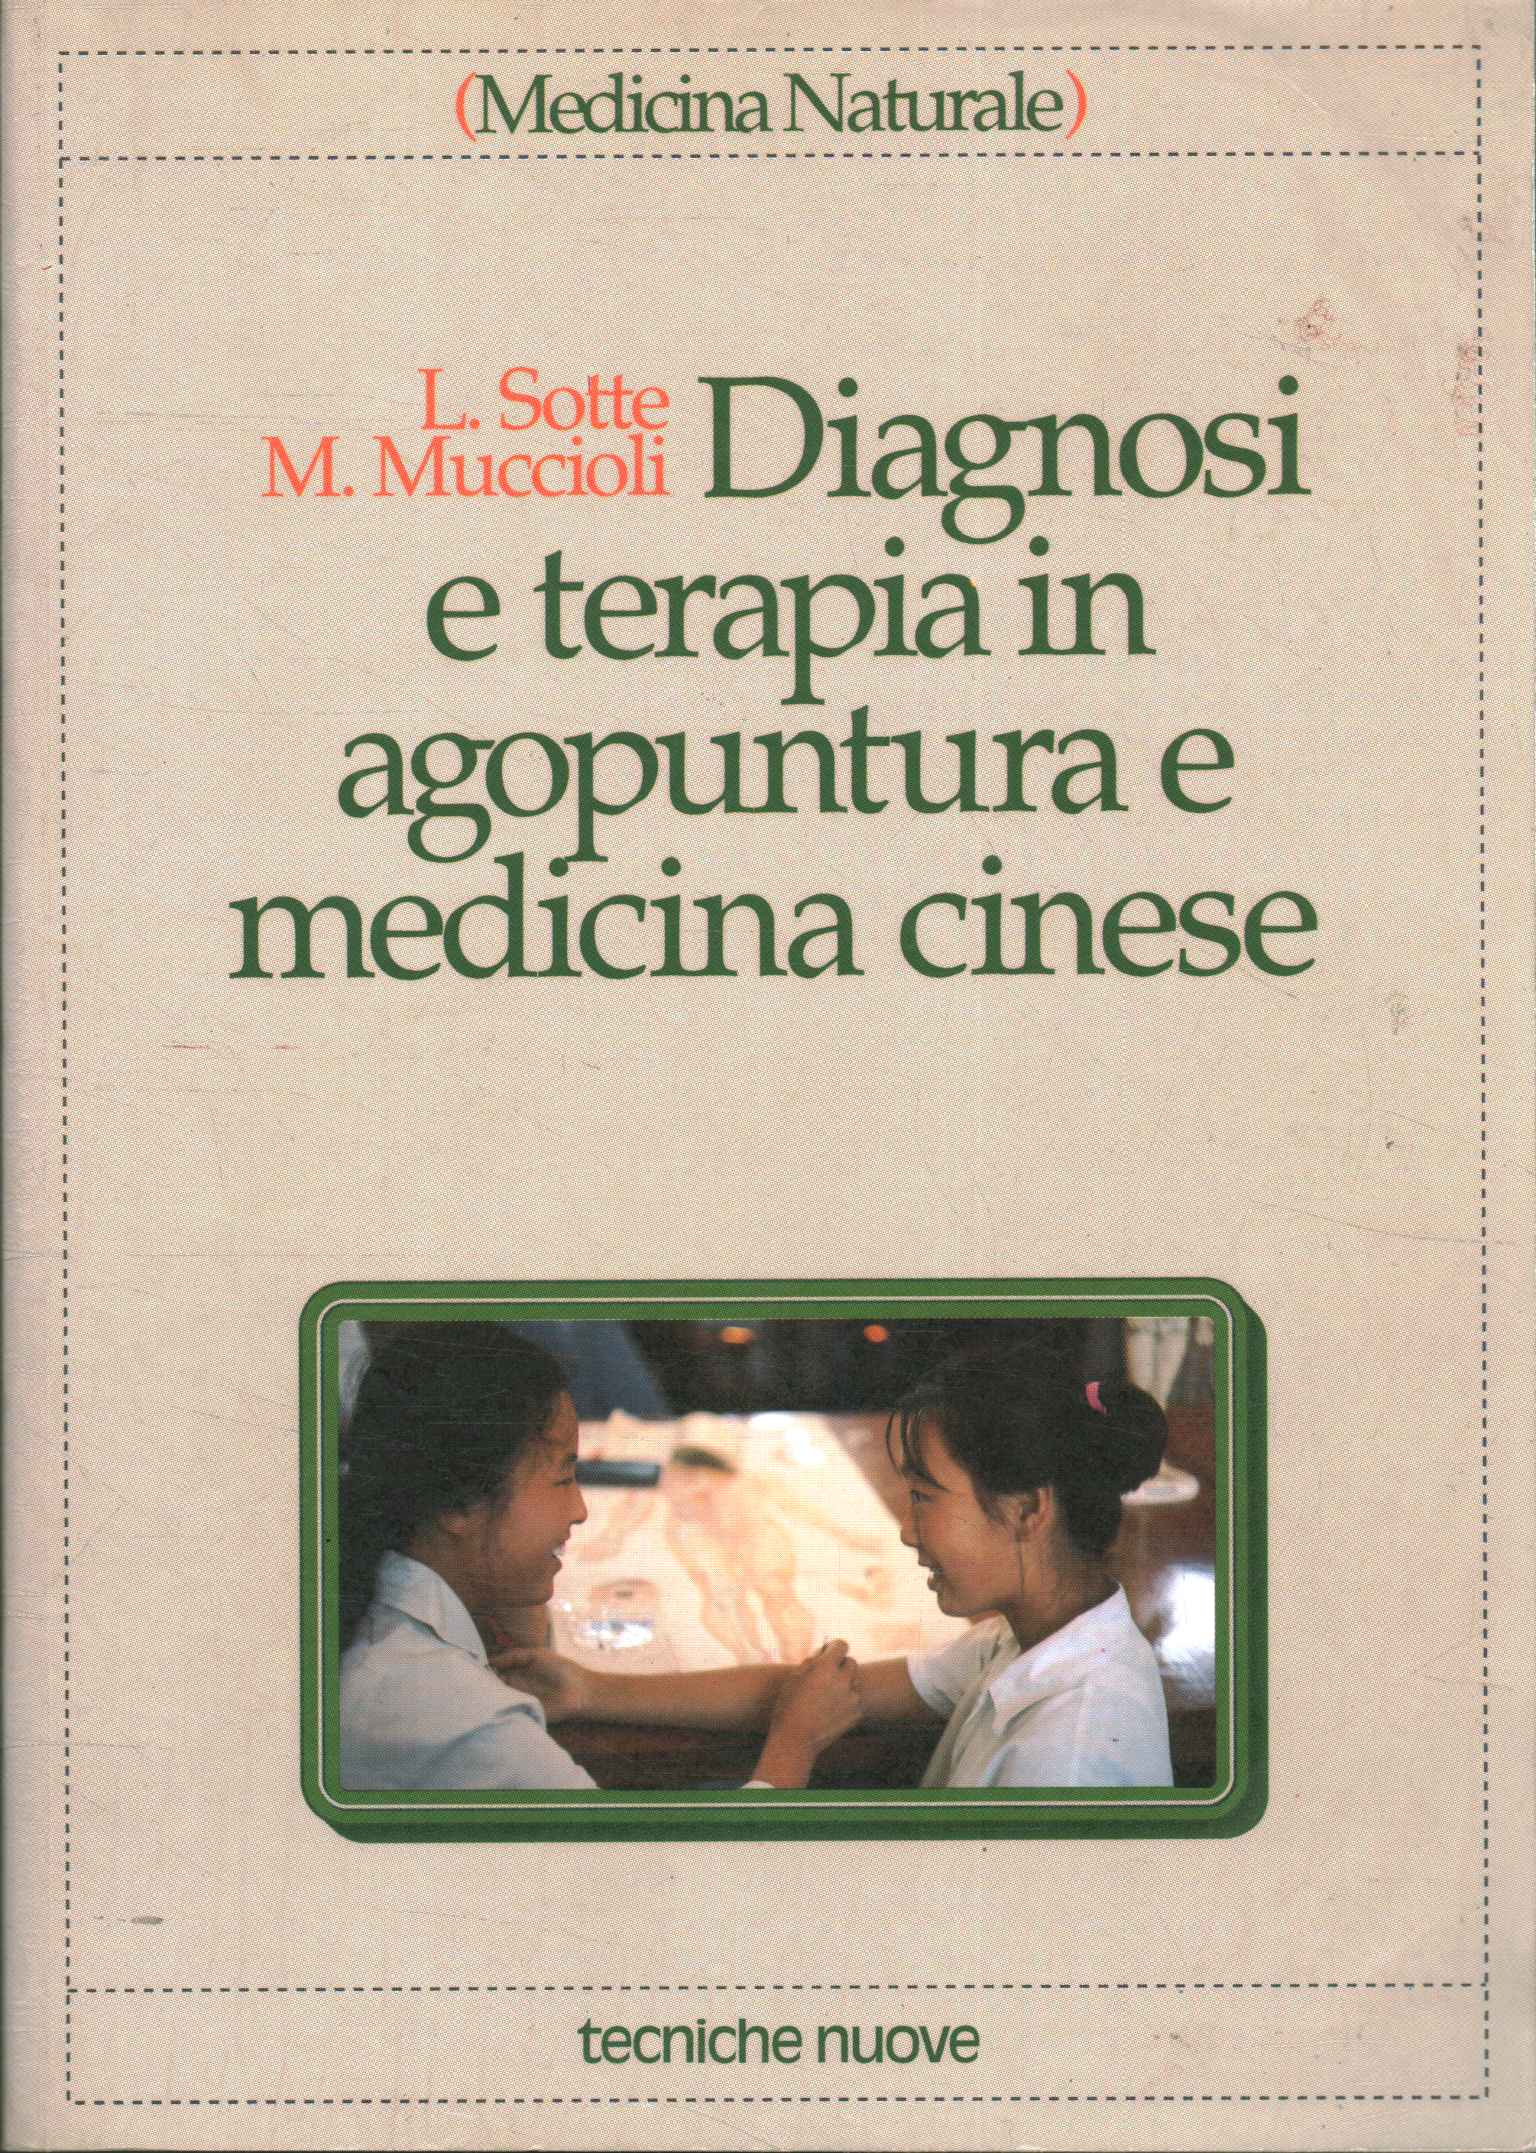 Diagnosis and therapy in acupuncture and medicine